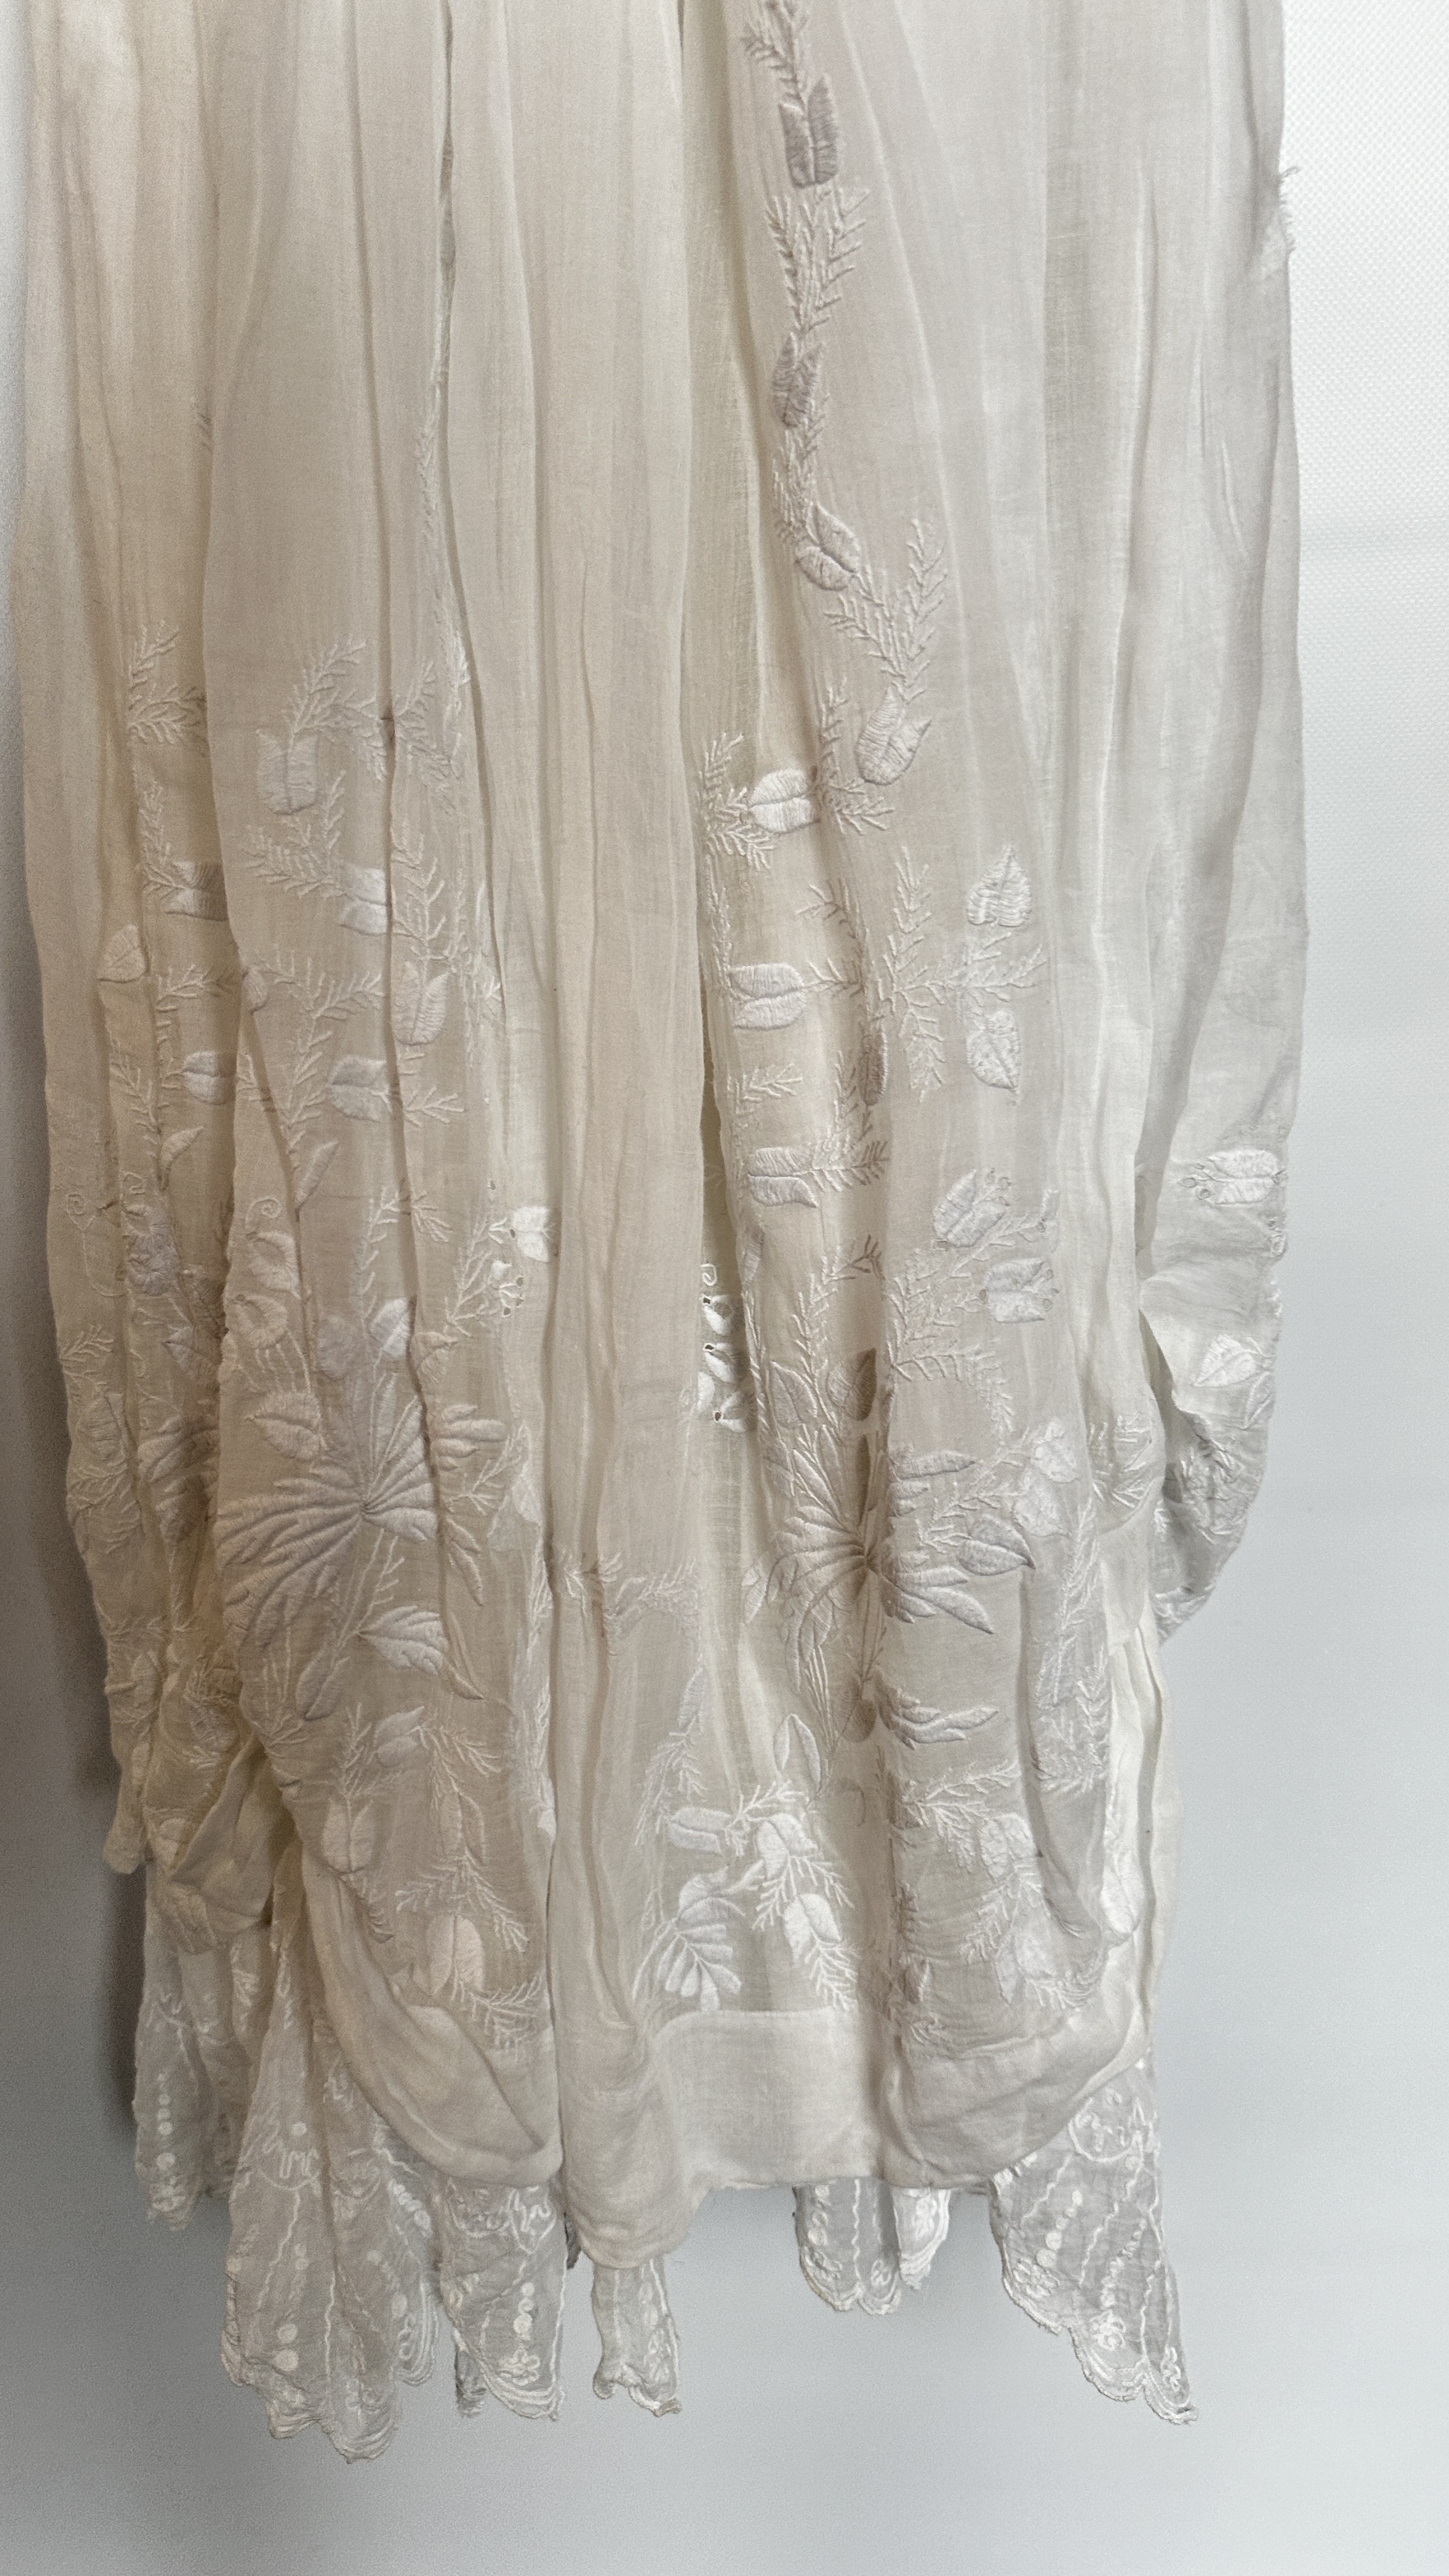 FINE WHITE COTTON EDWARDIAN DRESS, ALL OVER EMBROIDERY, EMPIRE LINE, PUFFED SLEEVES - A/F CONDITION, - Image 17 of 20